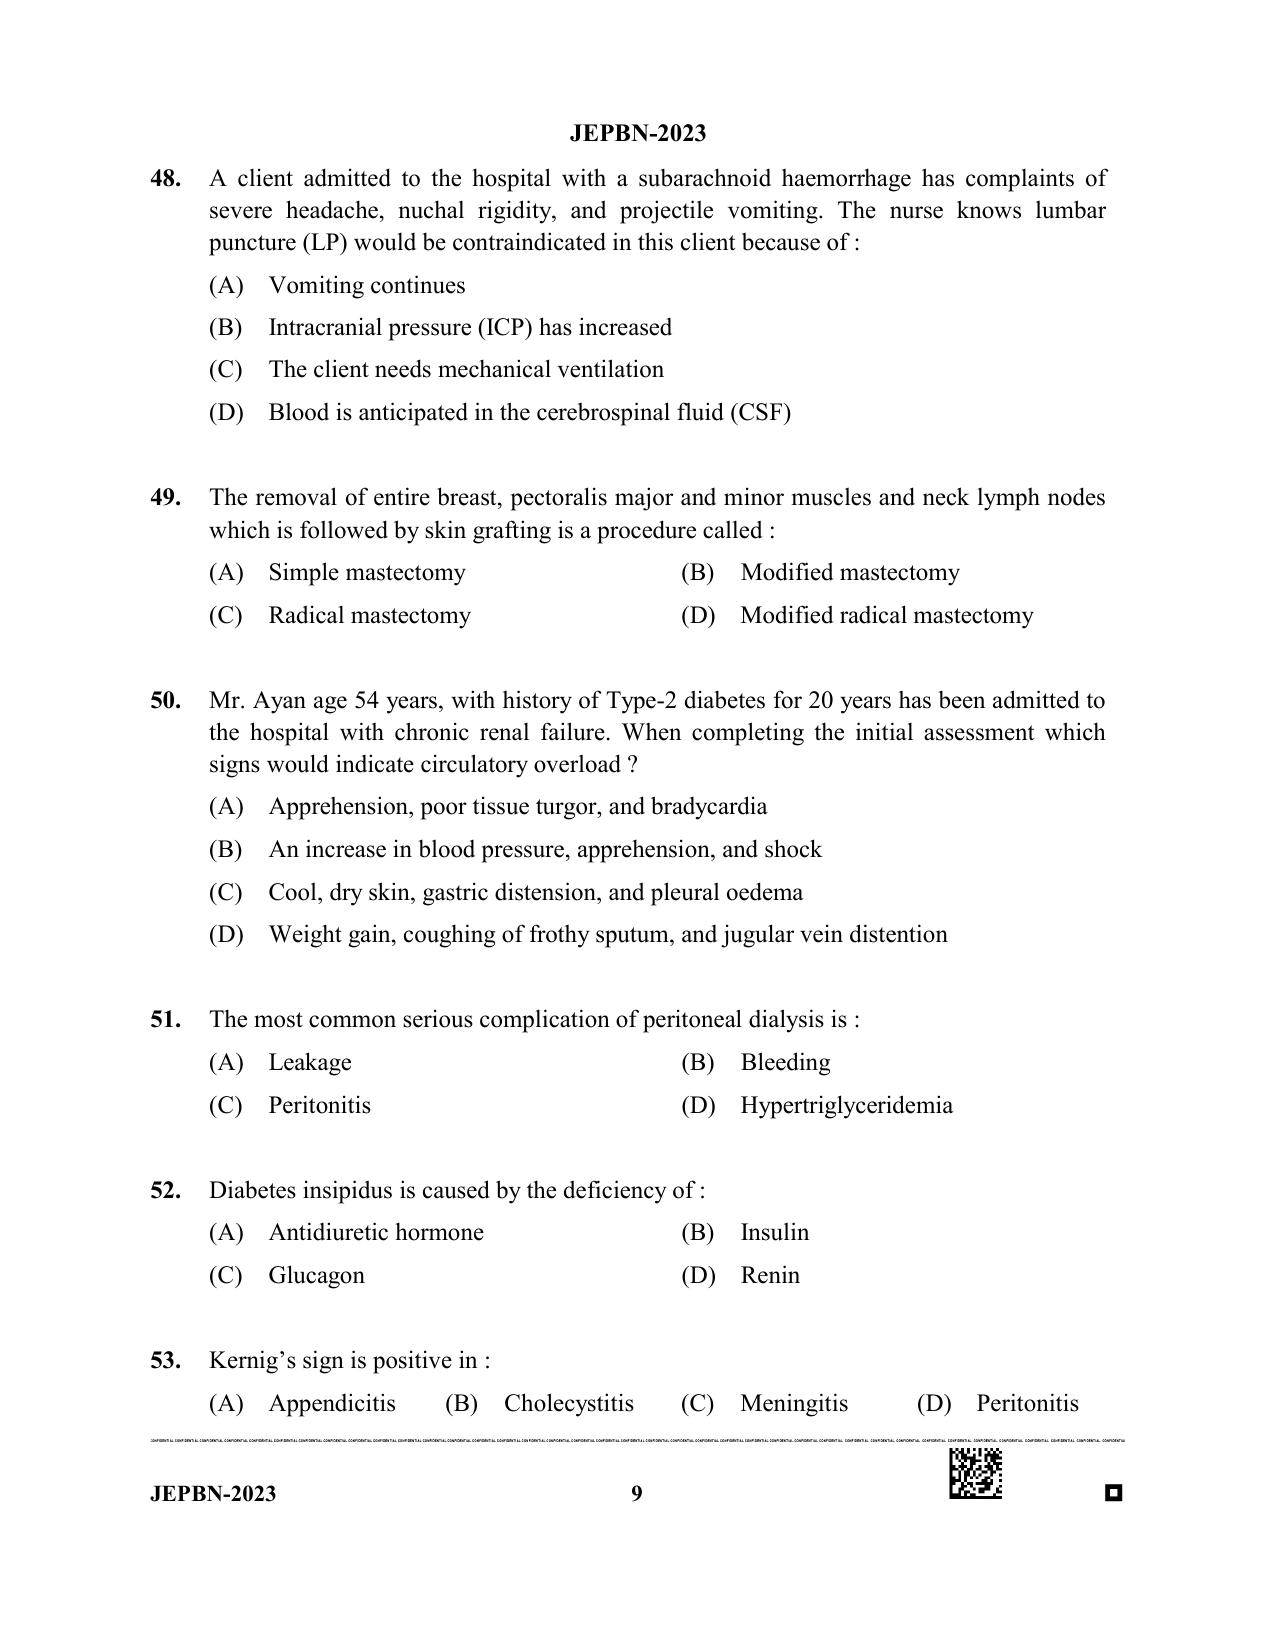 WBJEE JEPBN 2023 Question Paper - Page 9